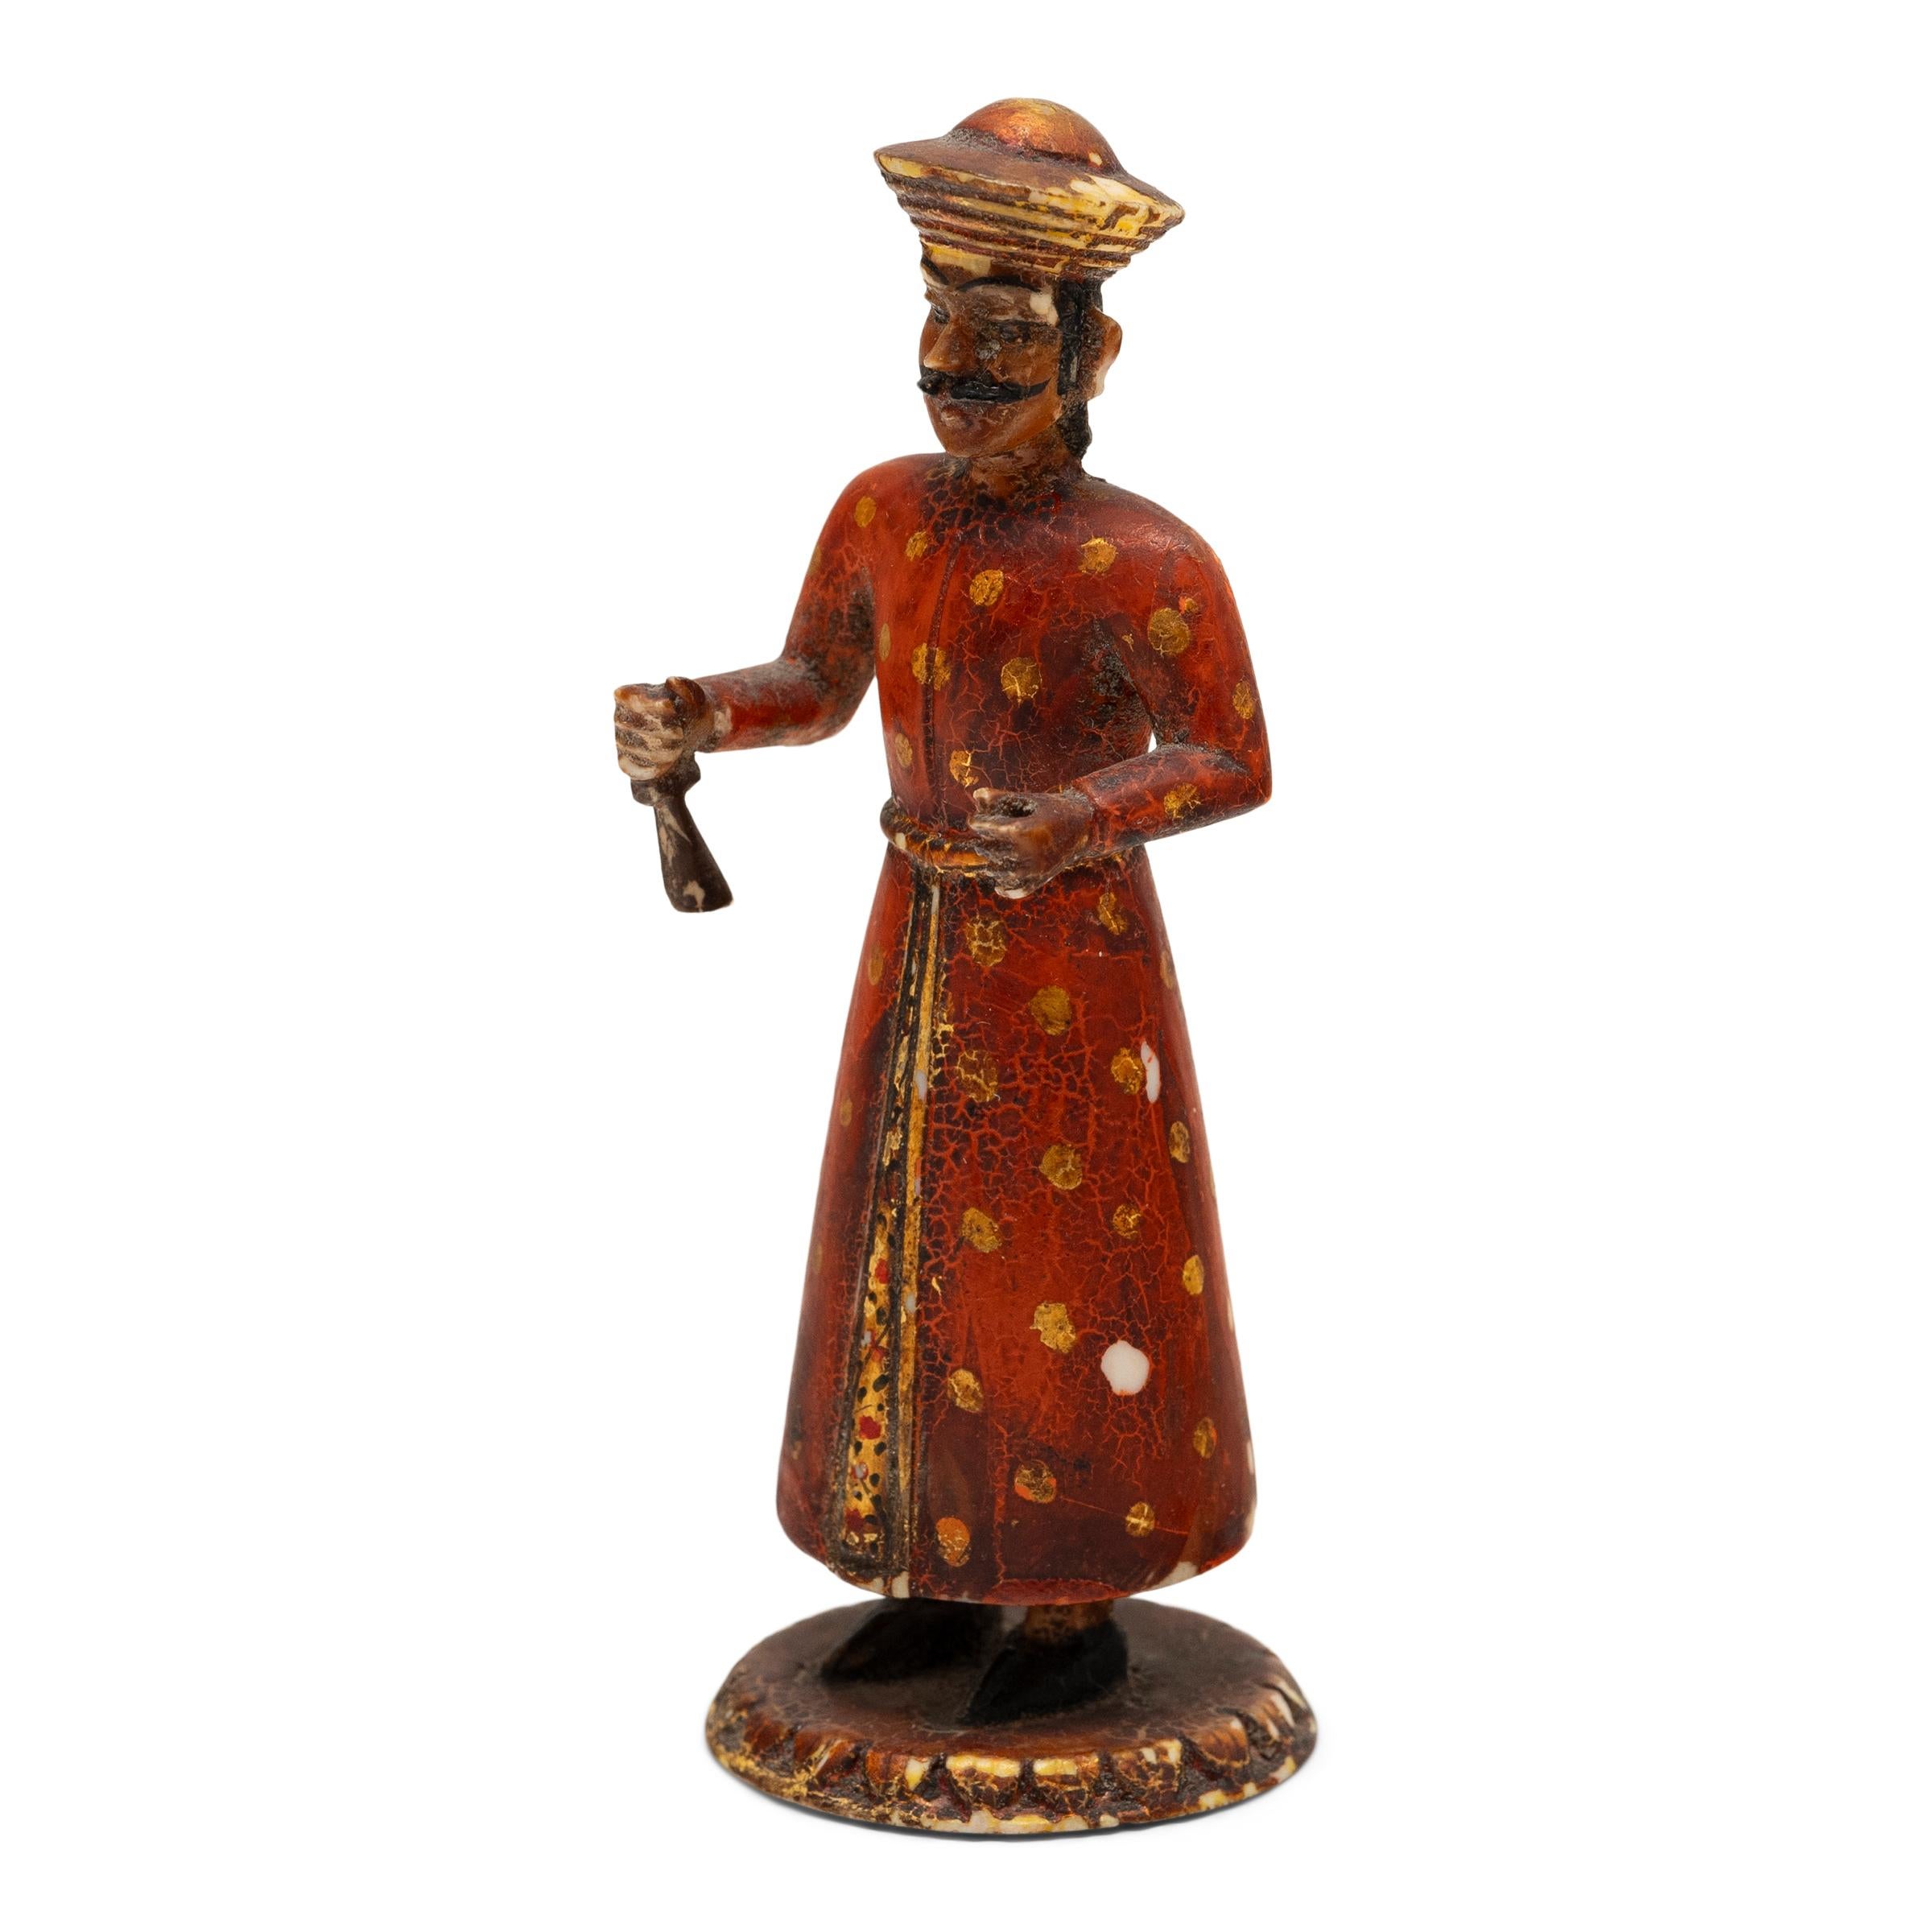 This early 20th century figurine is hand-carved of bone to depict an Indian soldier holding a musket rifle. Modeled after Sowar cavalrymen who served under the British East India Company, the petite figure is dressed in long robes painted with deep